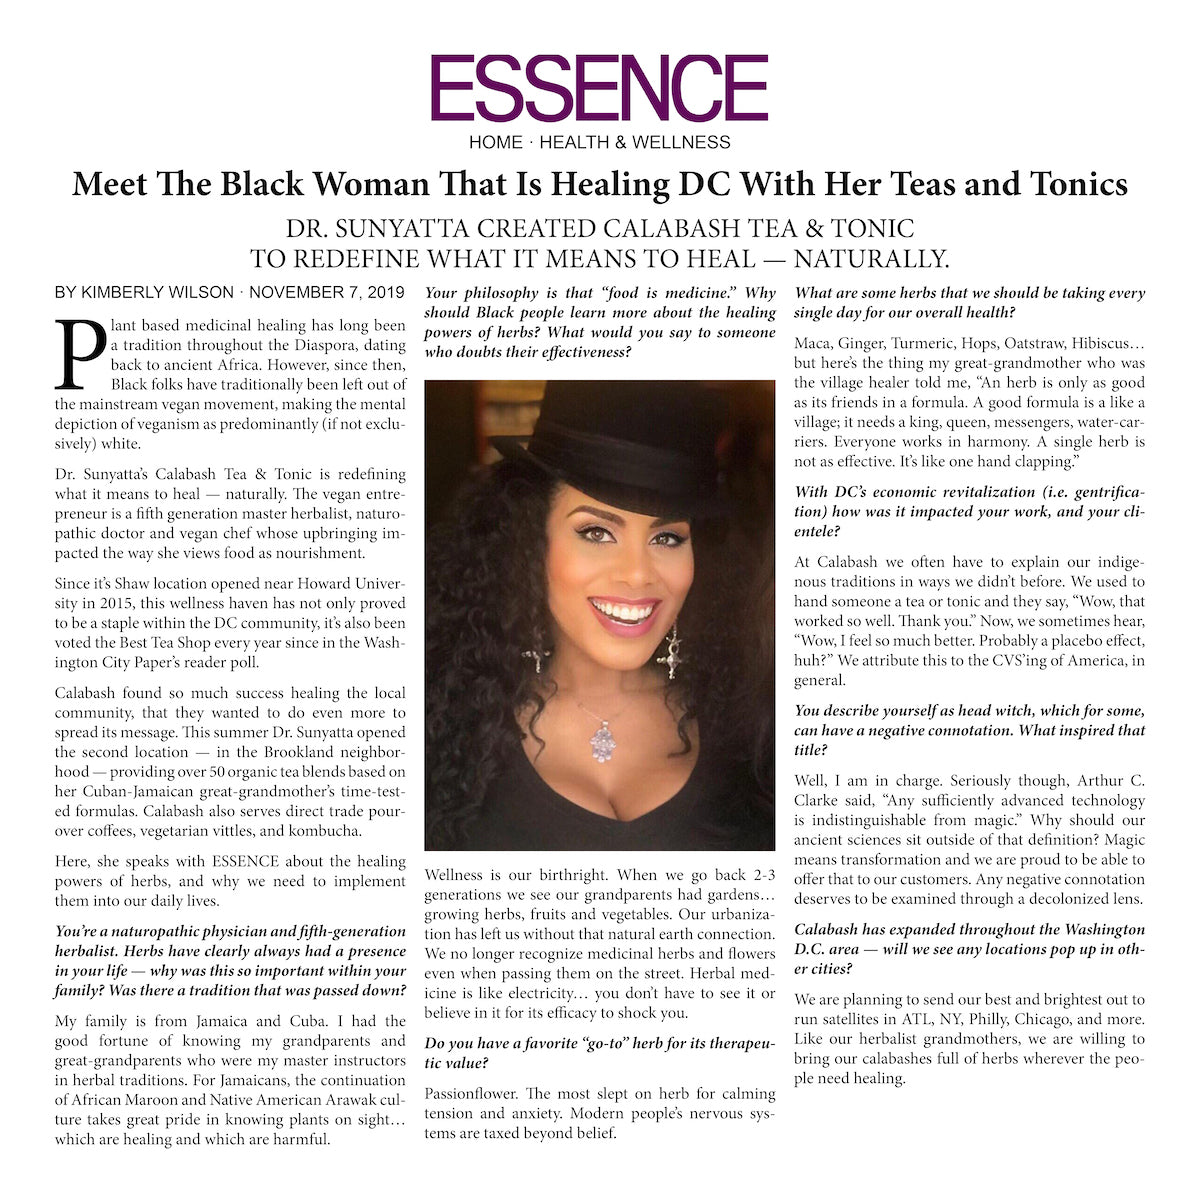 ESSENCE - Meet the Black Woman that is Healing DC with Her Teas and Tonics